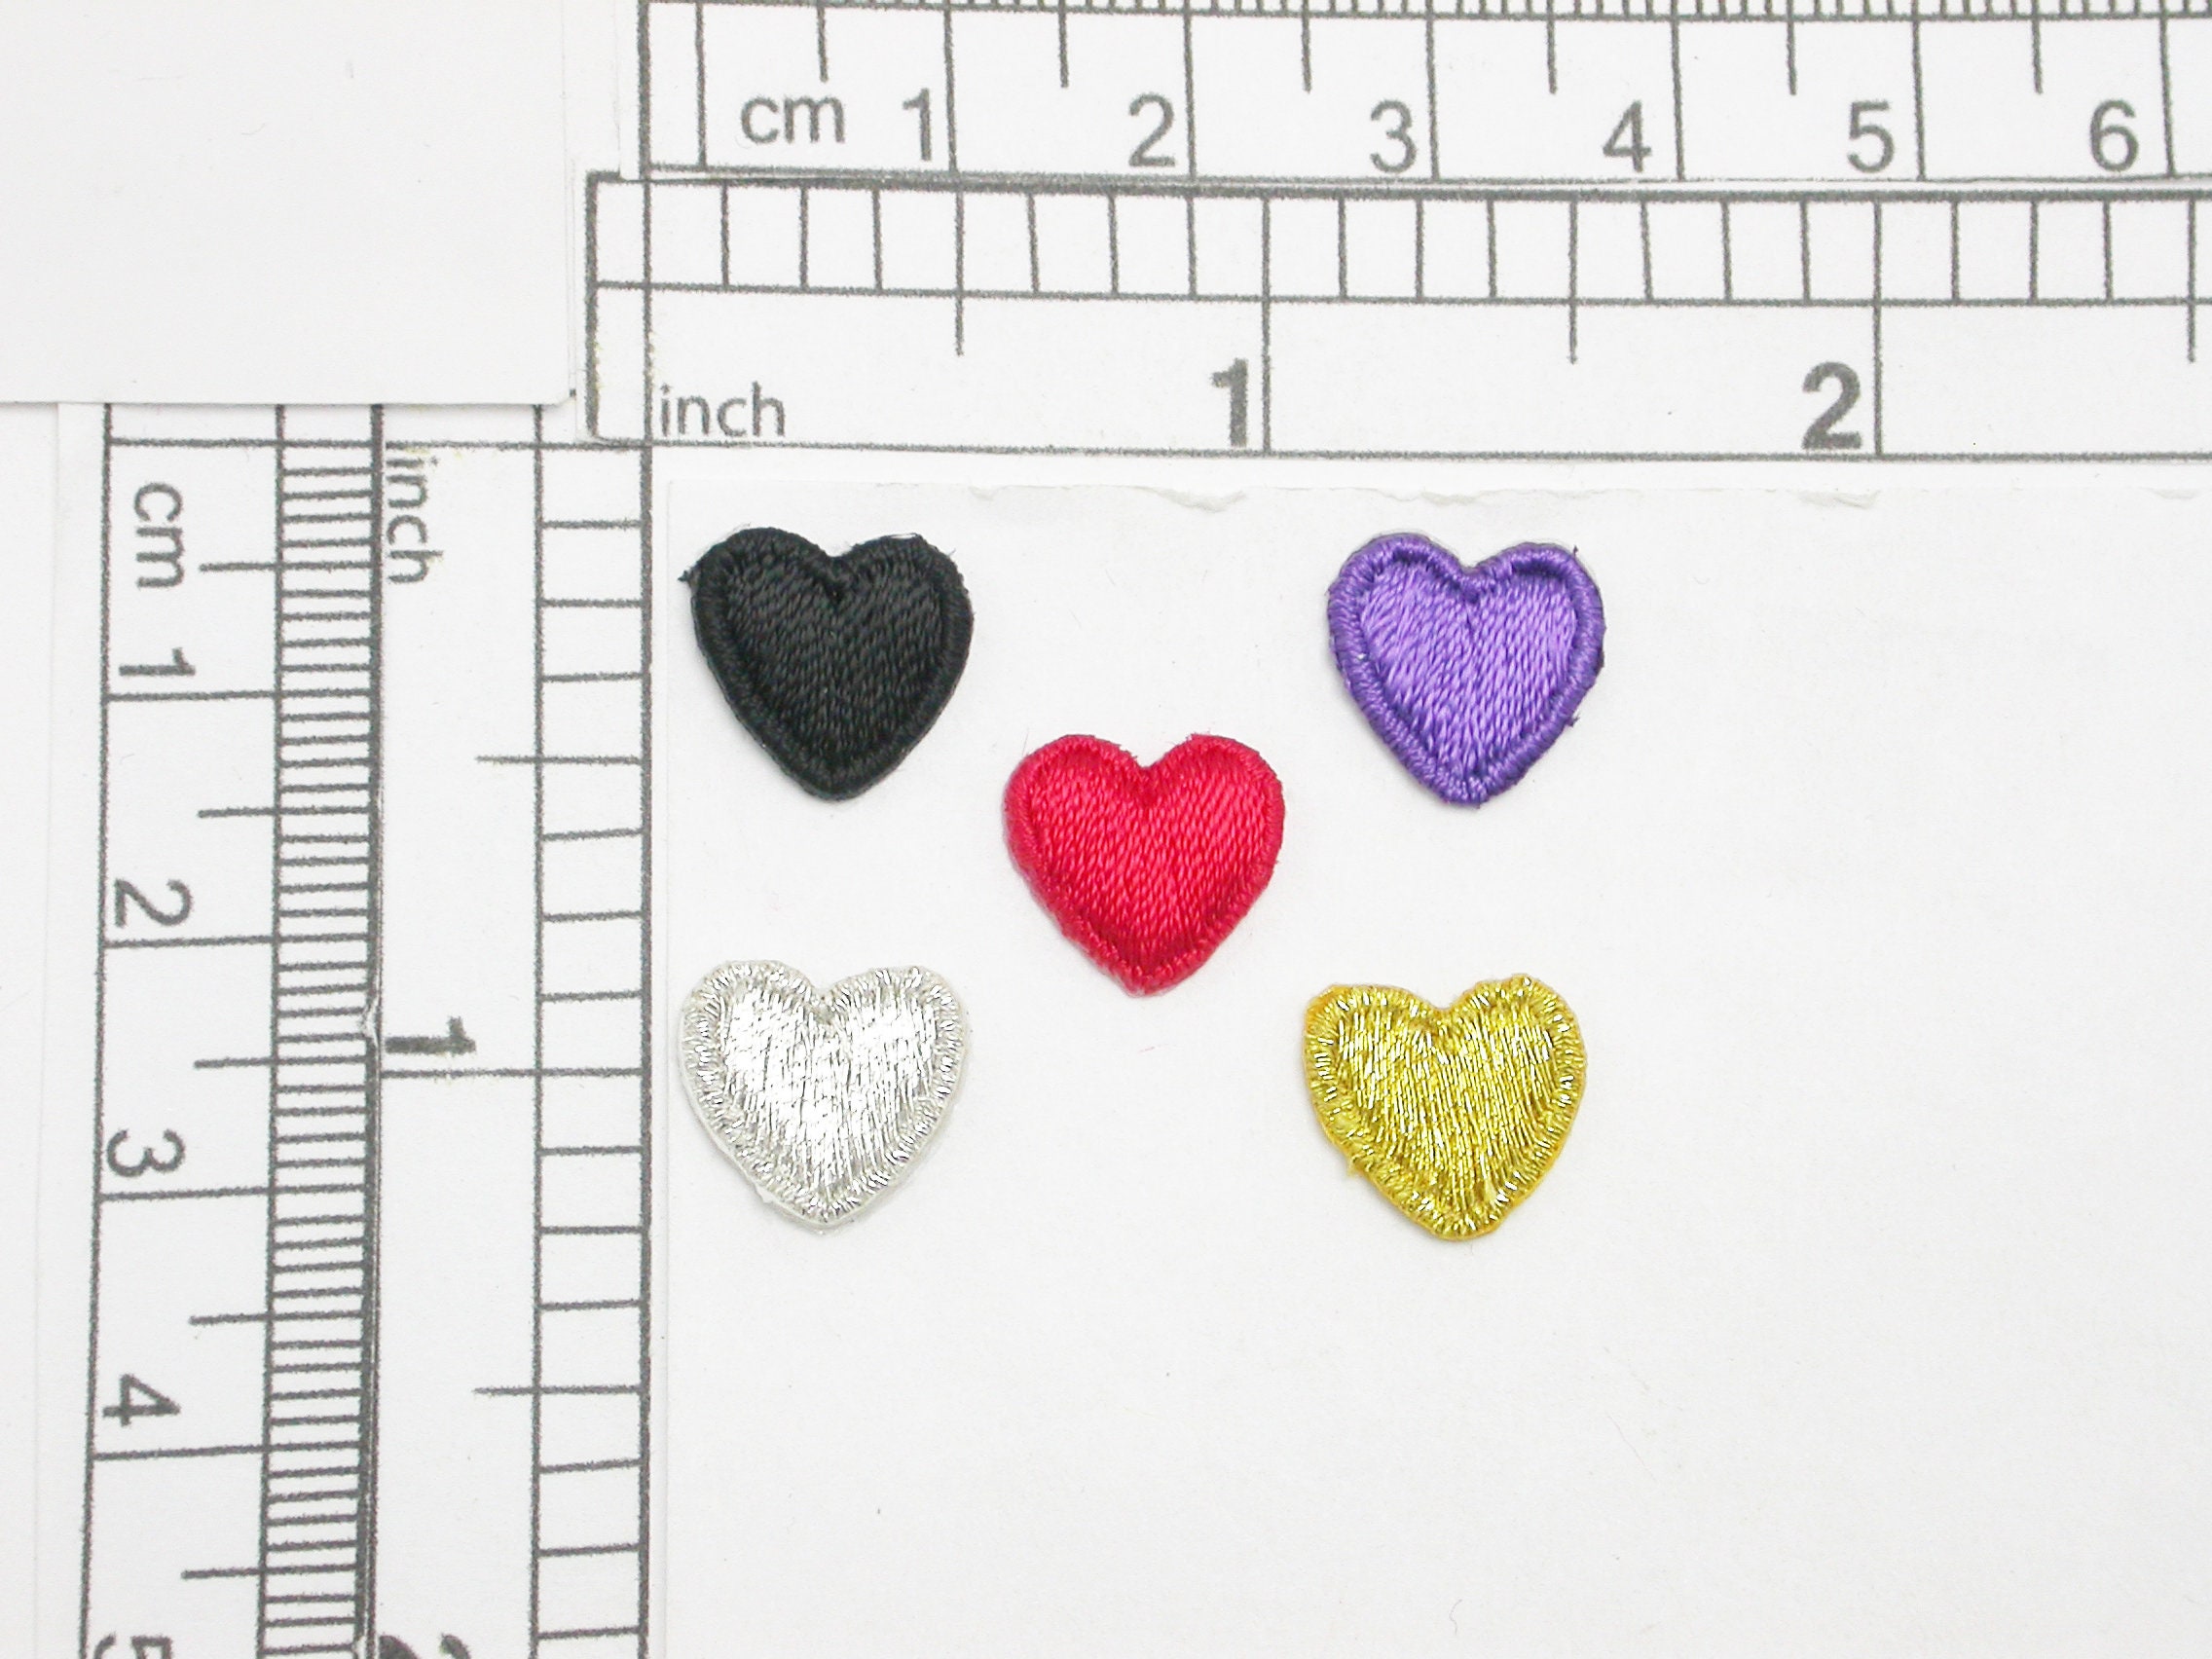 Mini Hearts Applique Patch - Red Heart, Love Badge 1 (3-Pack